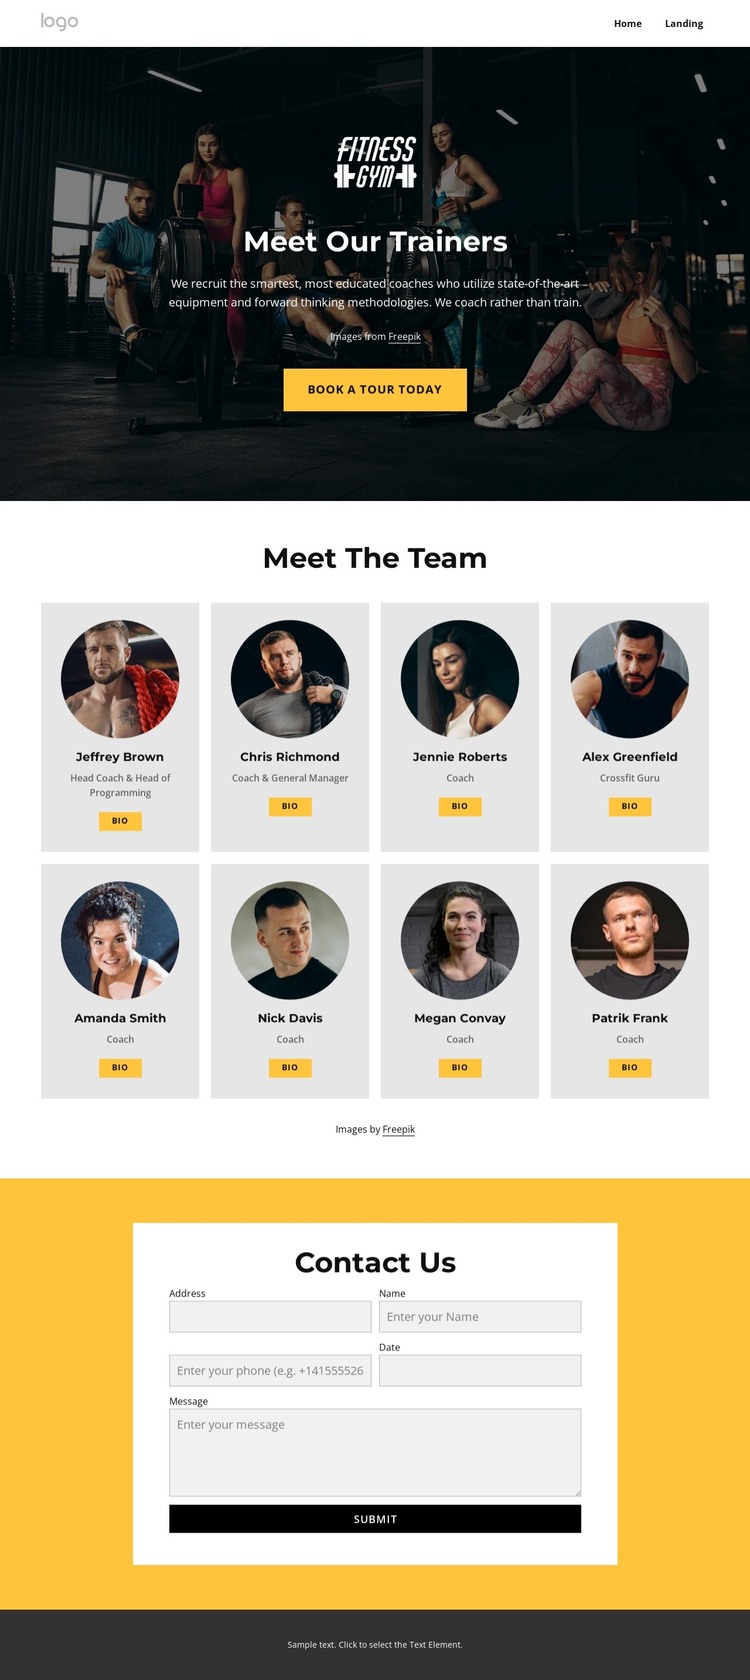 Meet our trainers HTML Template